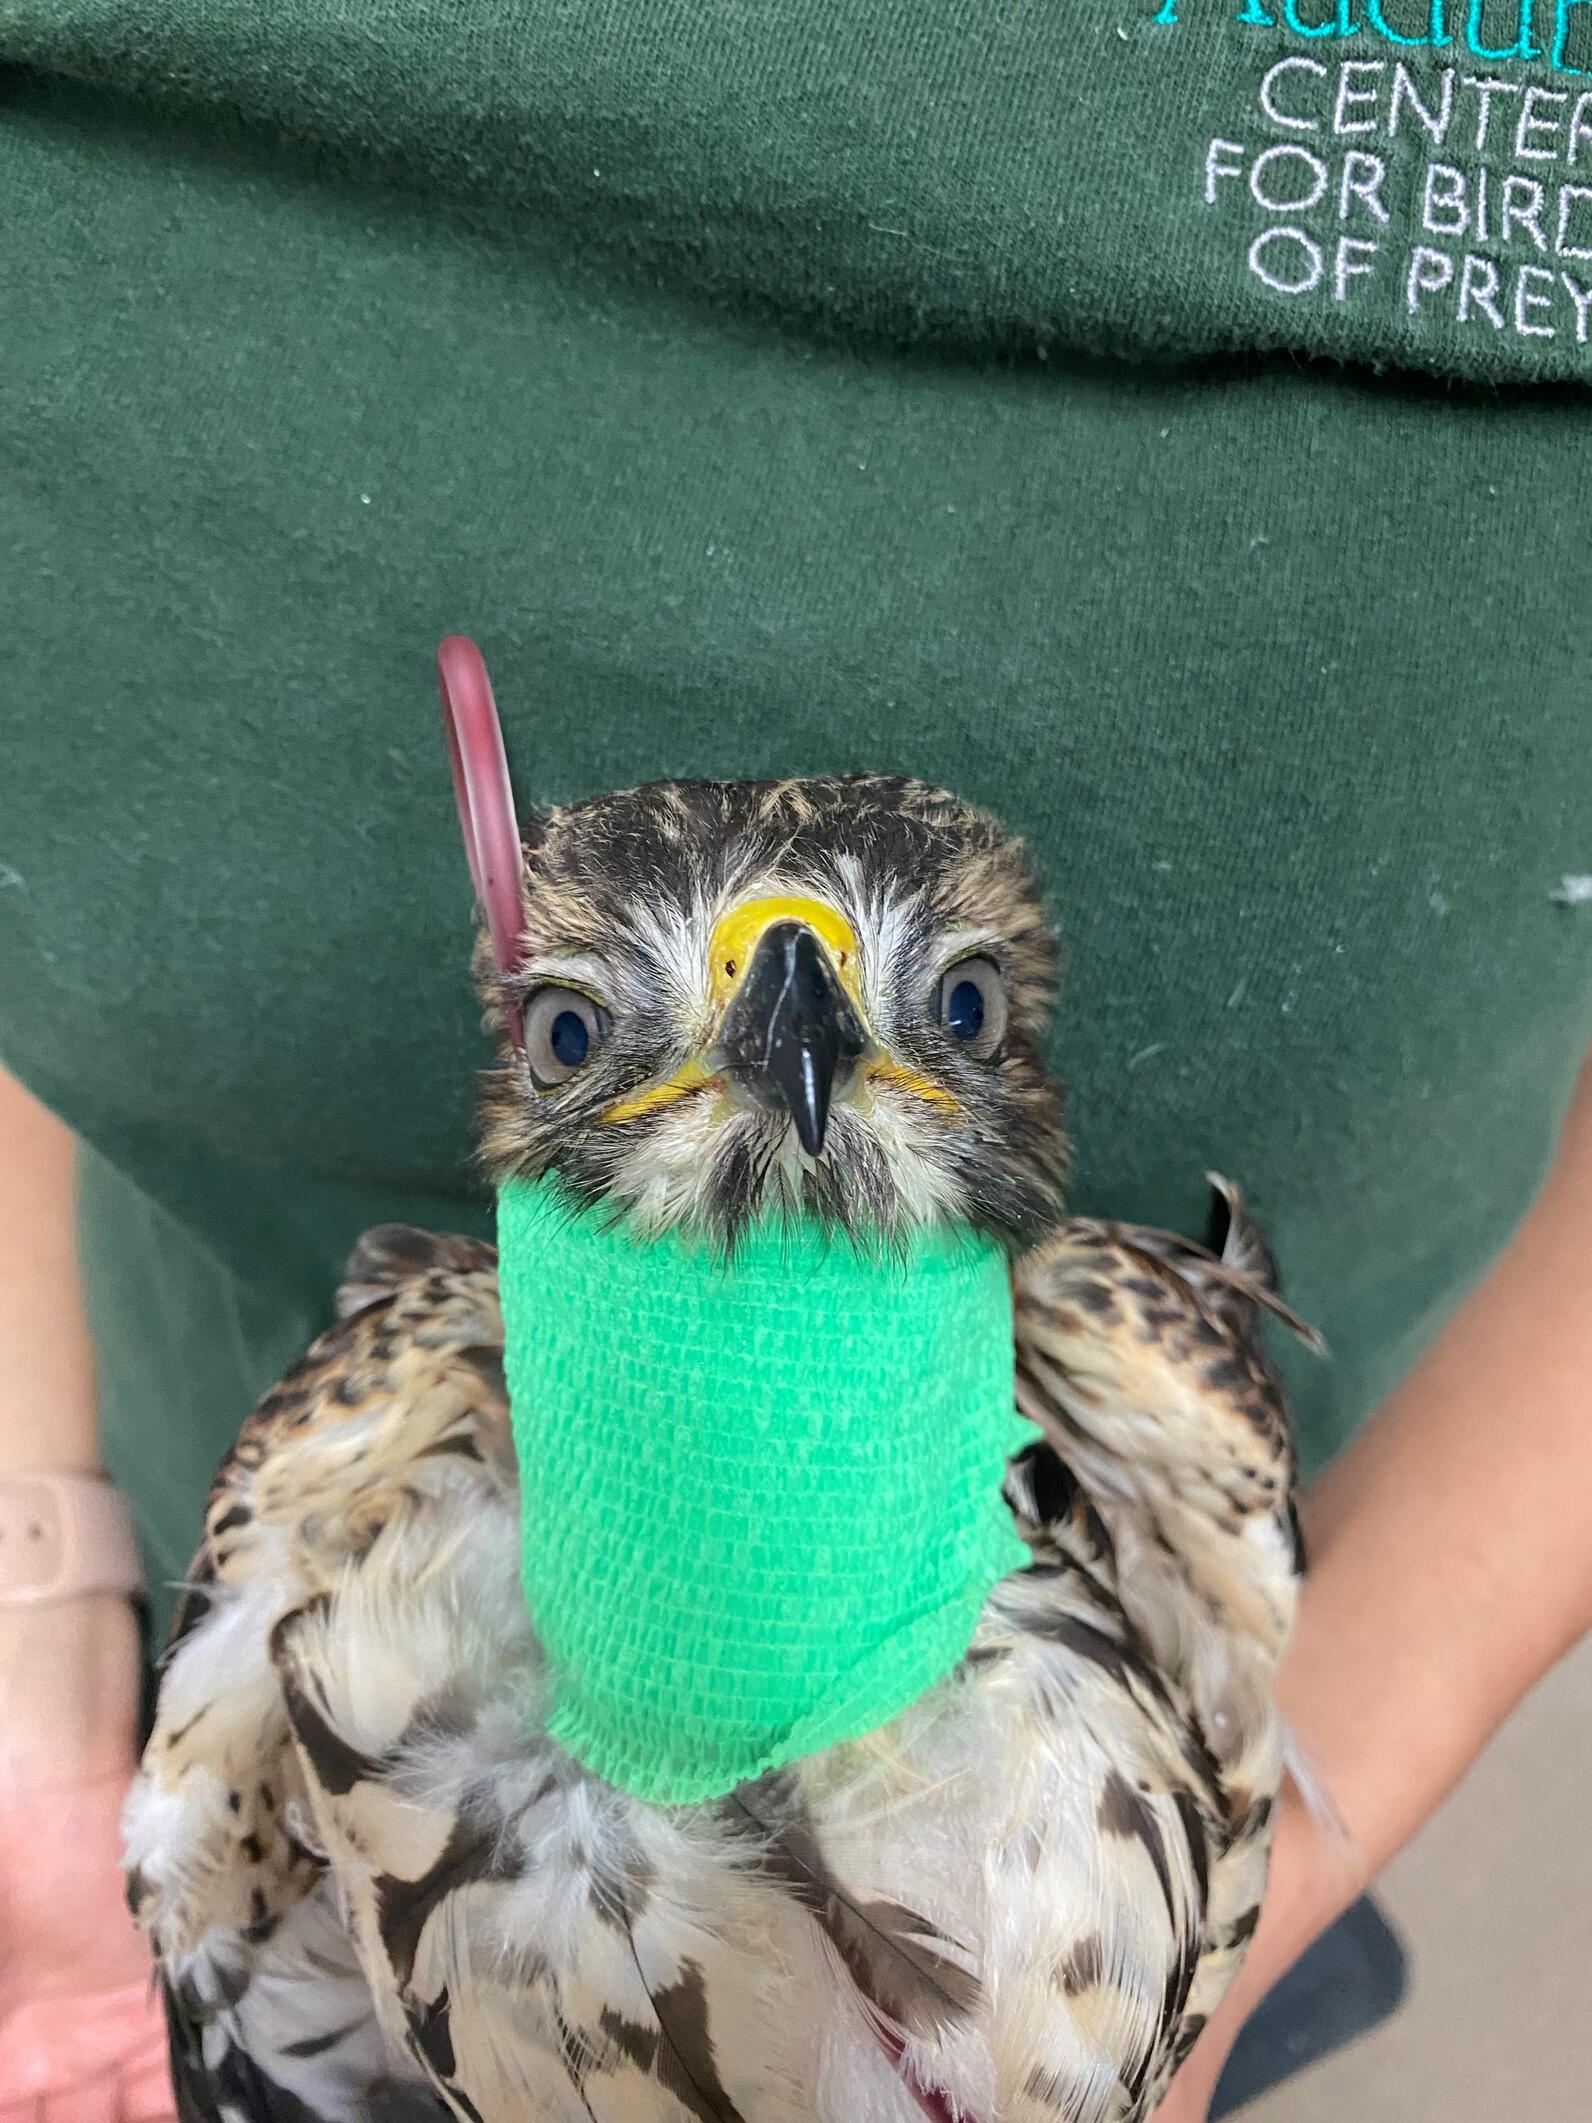 A young Red-shouldered Hawk wrapped in a green blanket.